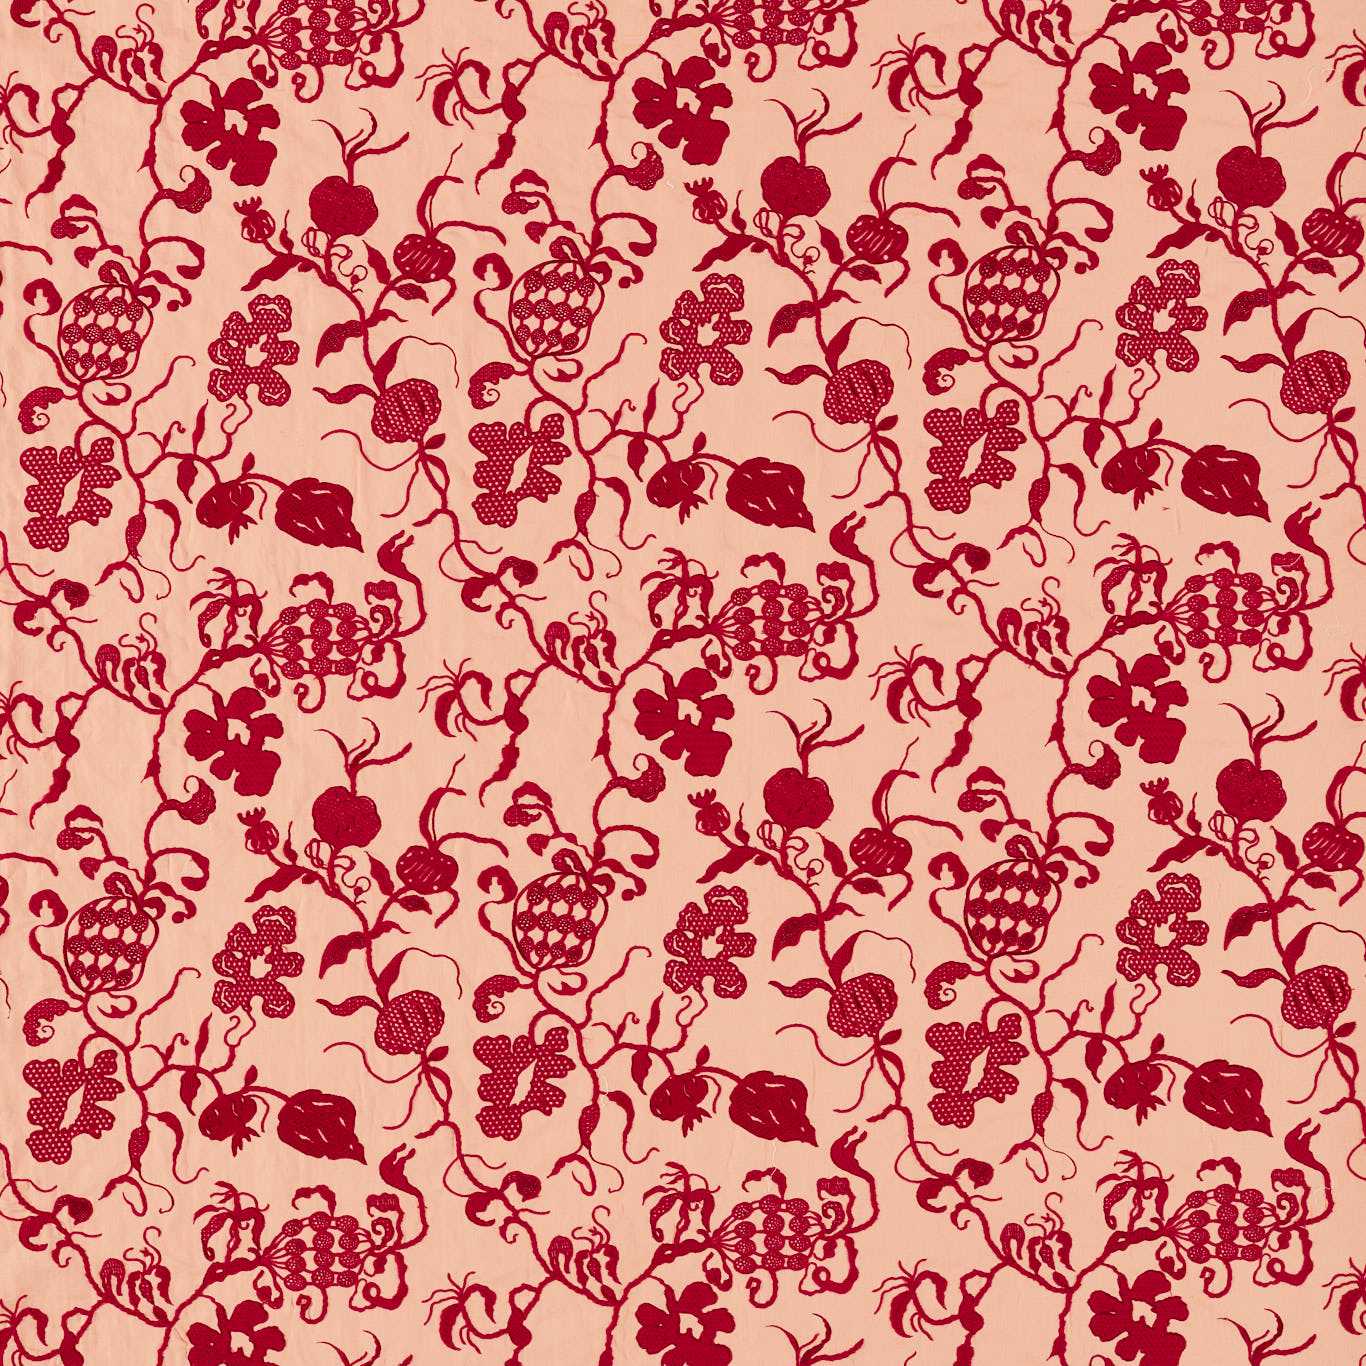 Mydsommer Pickings Conch/Madder Fabric by SAN